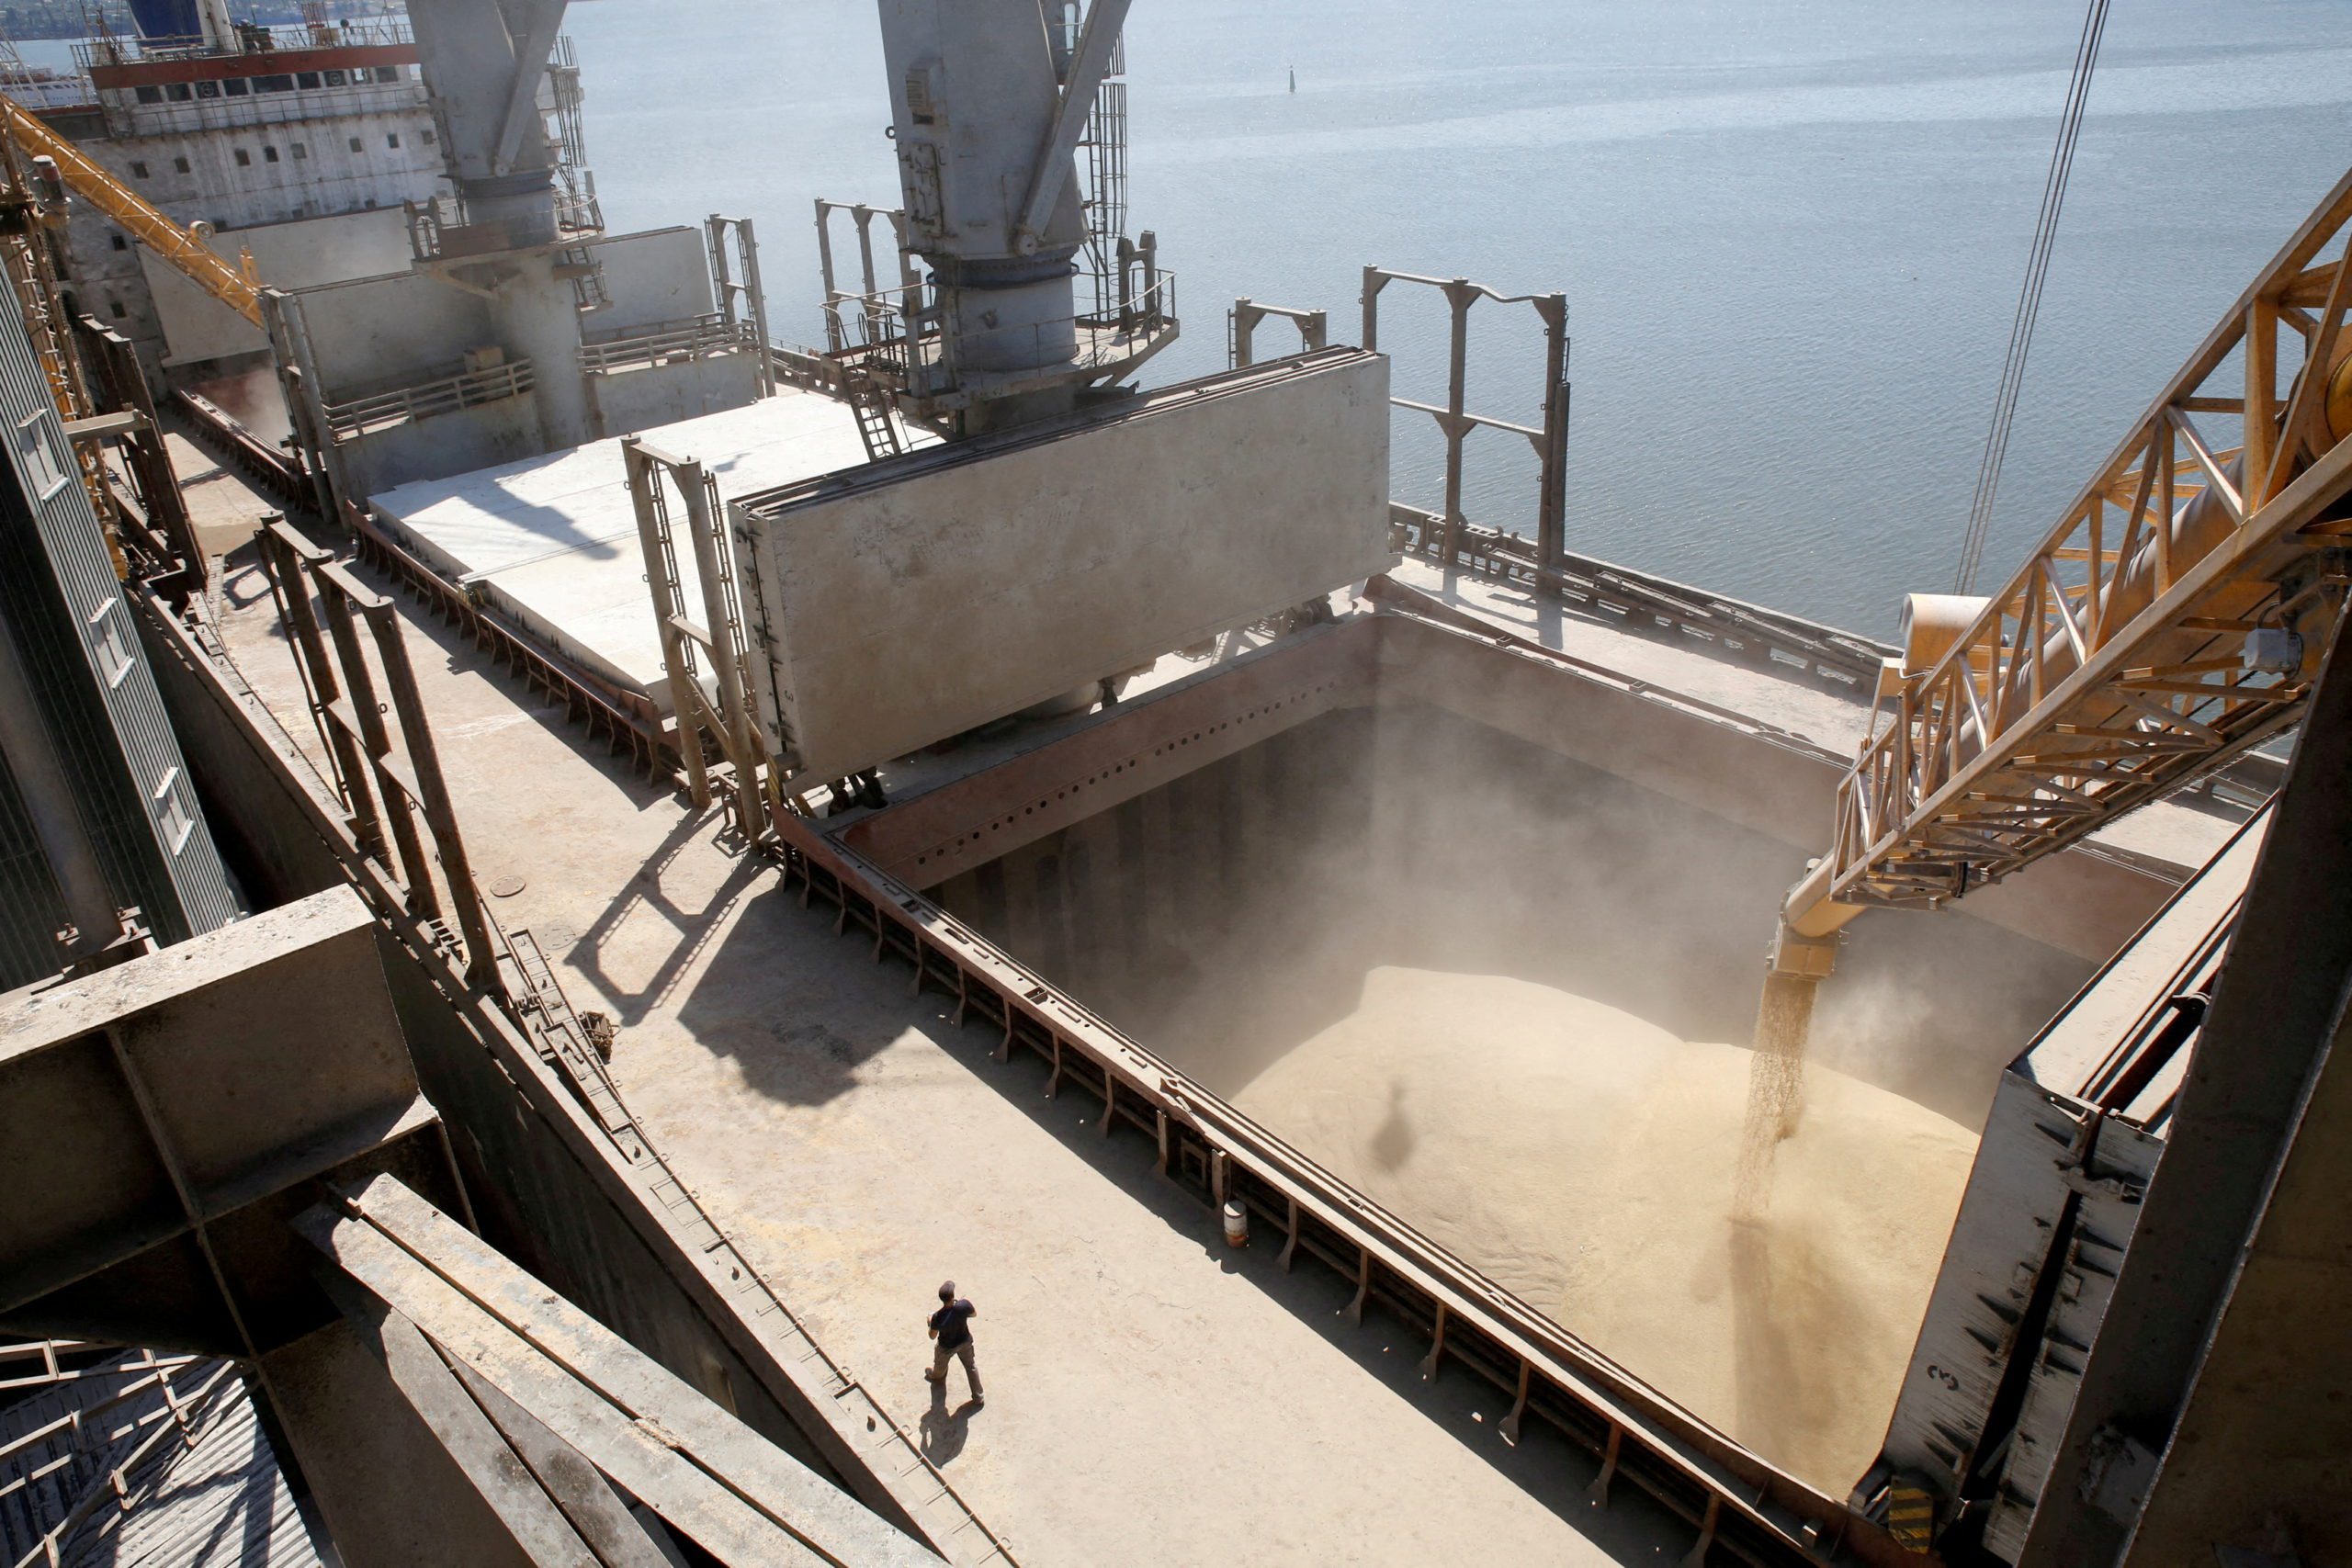 Ukraine’s Path to Exporting Grain Involves Clearing Mines, Finding Ships and Trusting Putin